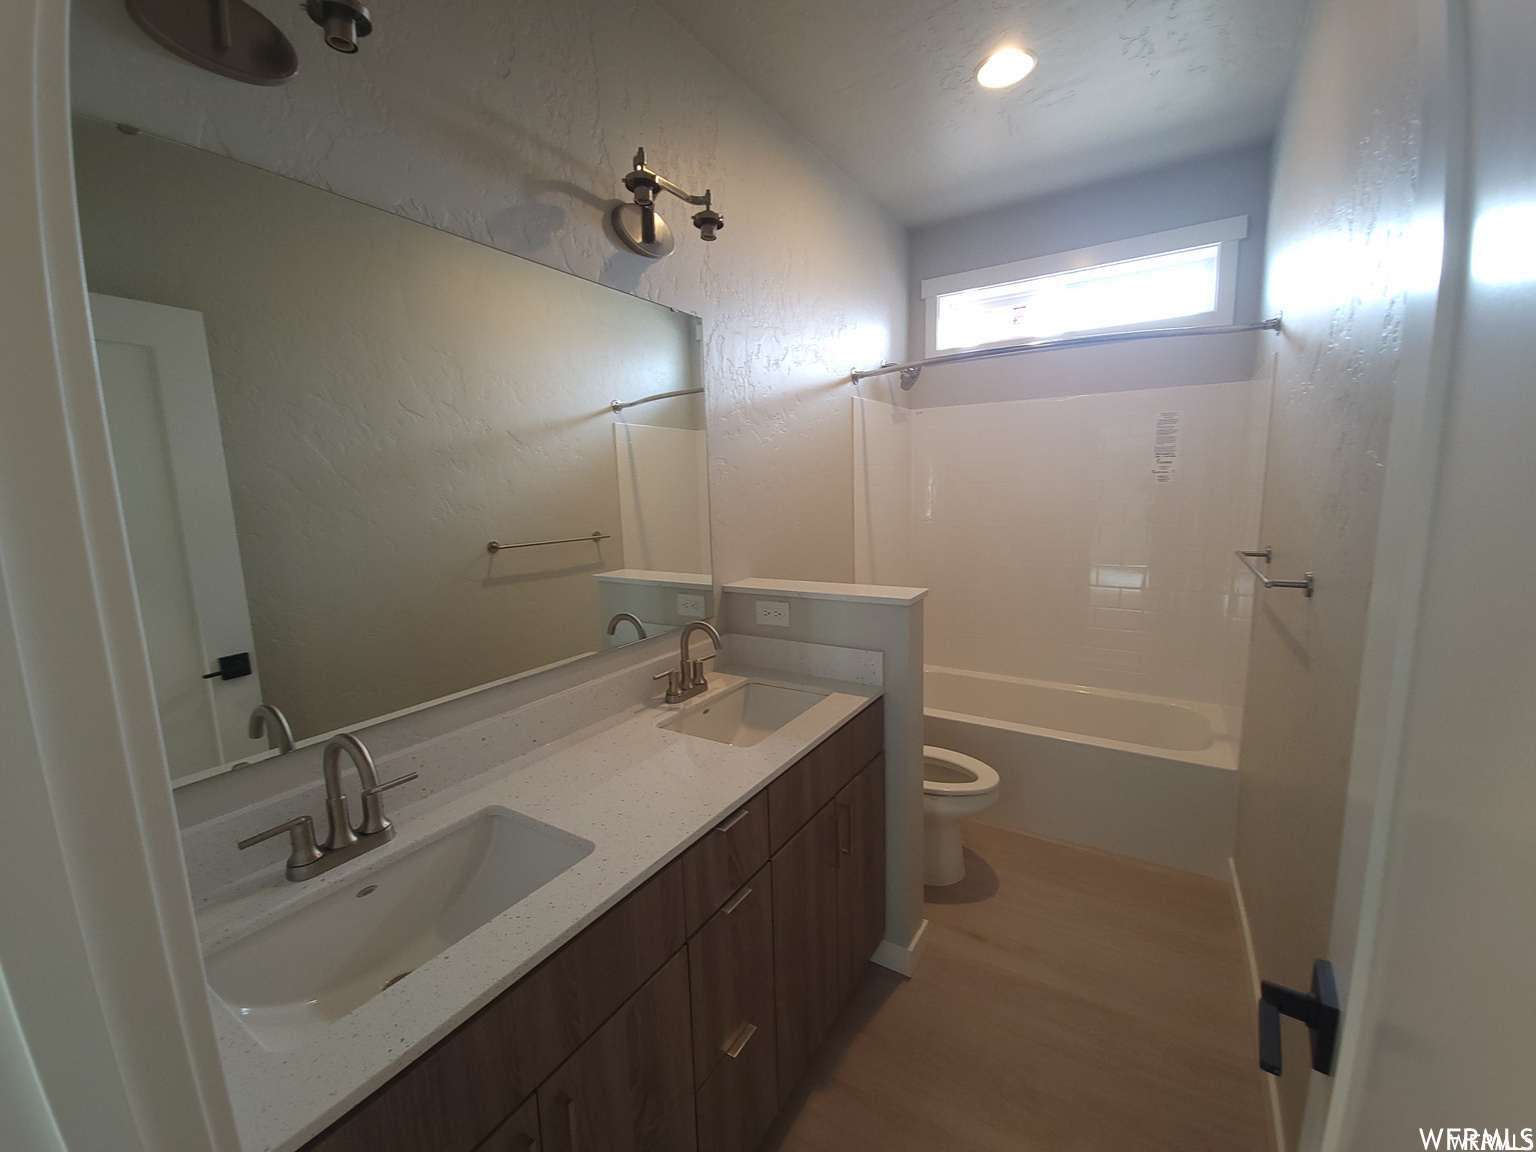 Full bathroom with natural light, toilet, mirror, dual bowl vanity, and bathing tub / shower combination